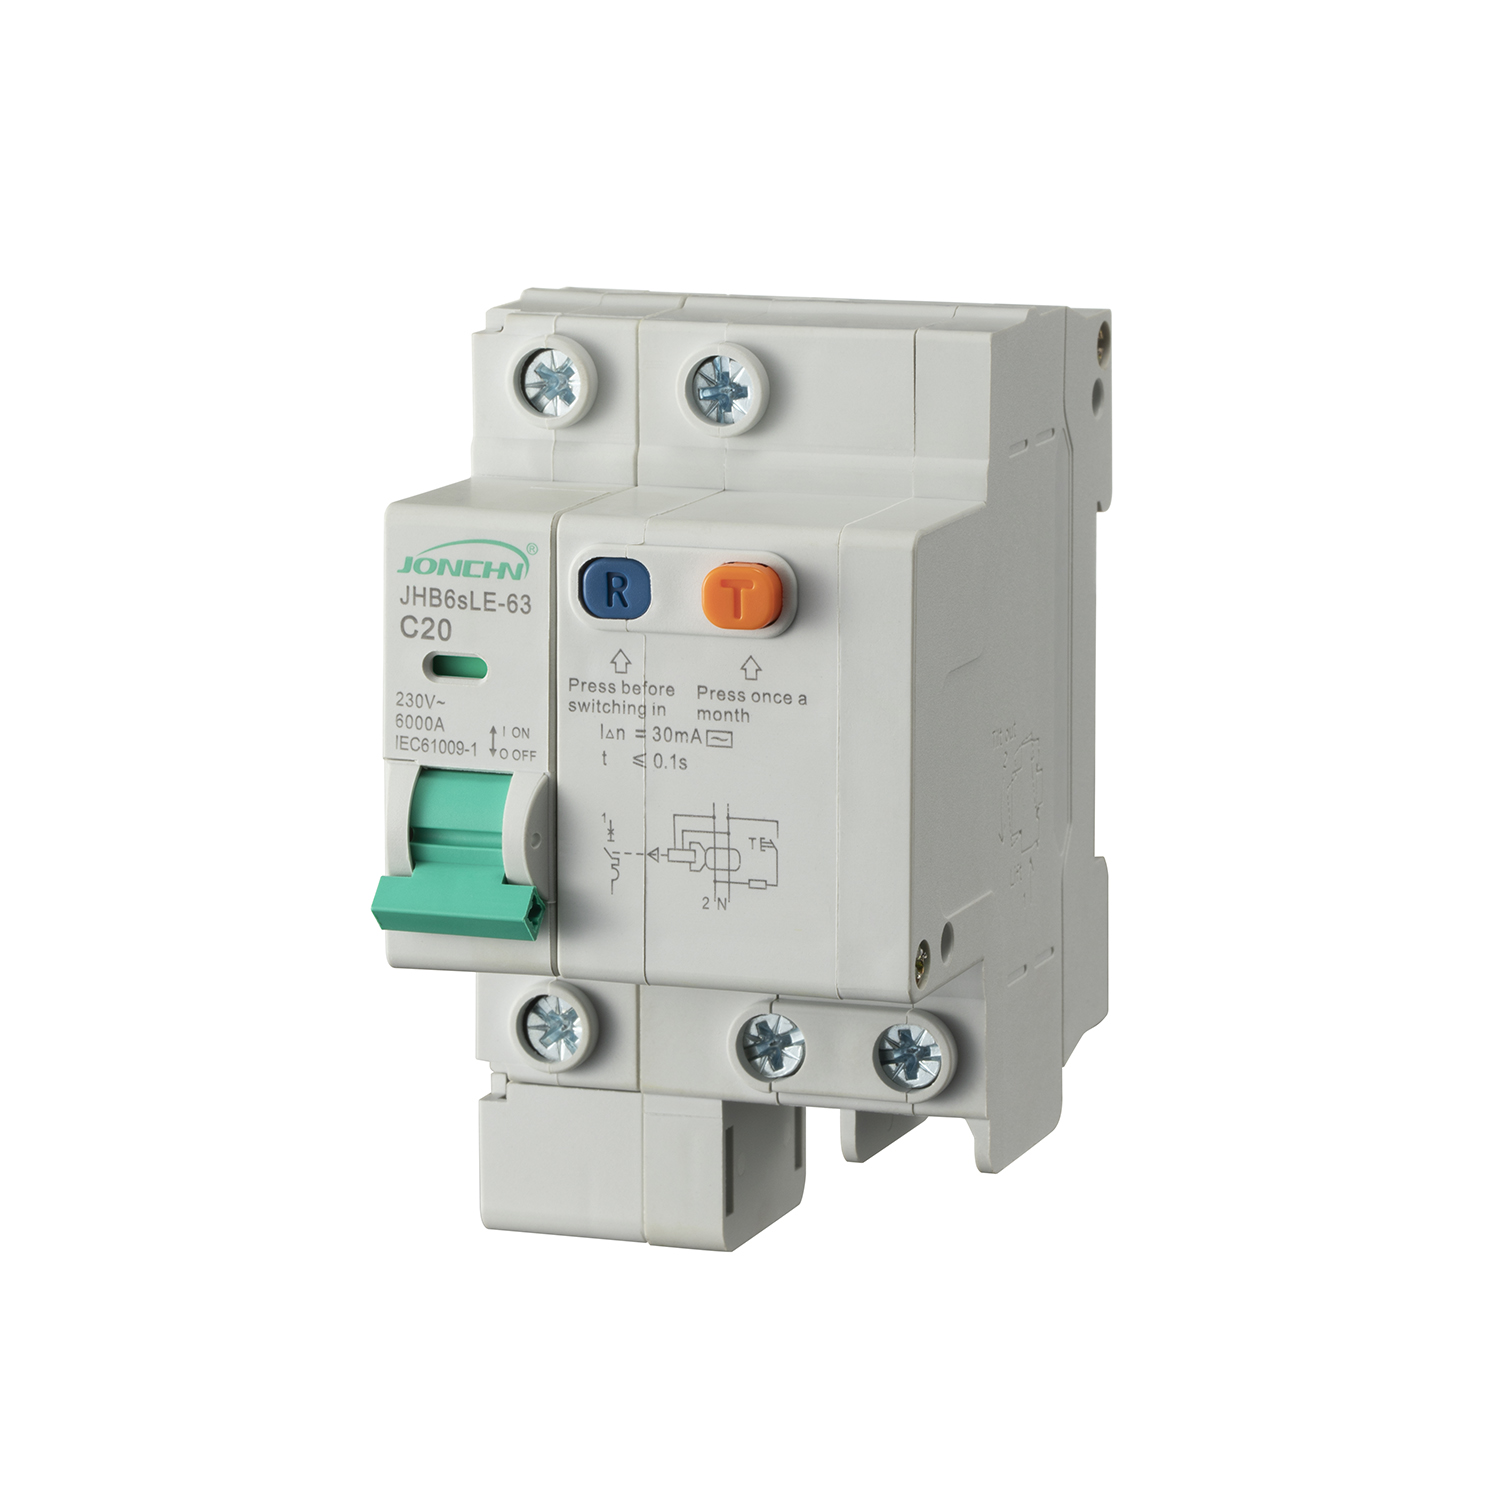 Factory Made Hot Selling China Manufacturer High Voltage Indoor Vacuum Circuit Breaker-JHB6S